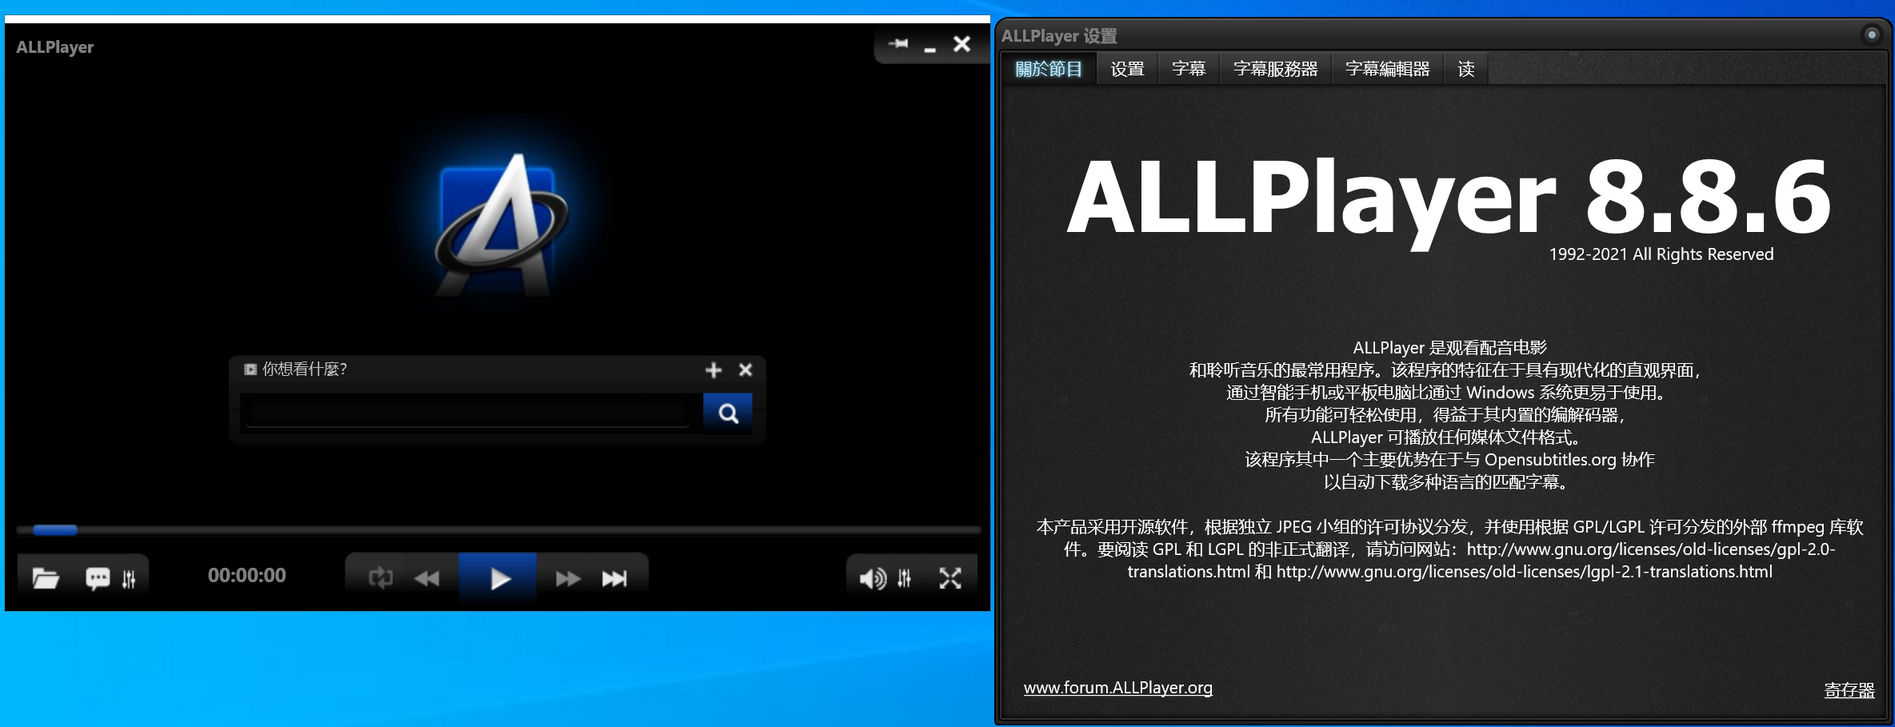 download the new version for ios ALLPlayer 8.9.6